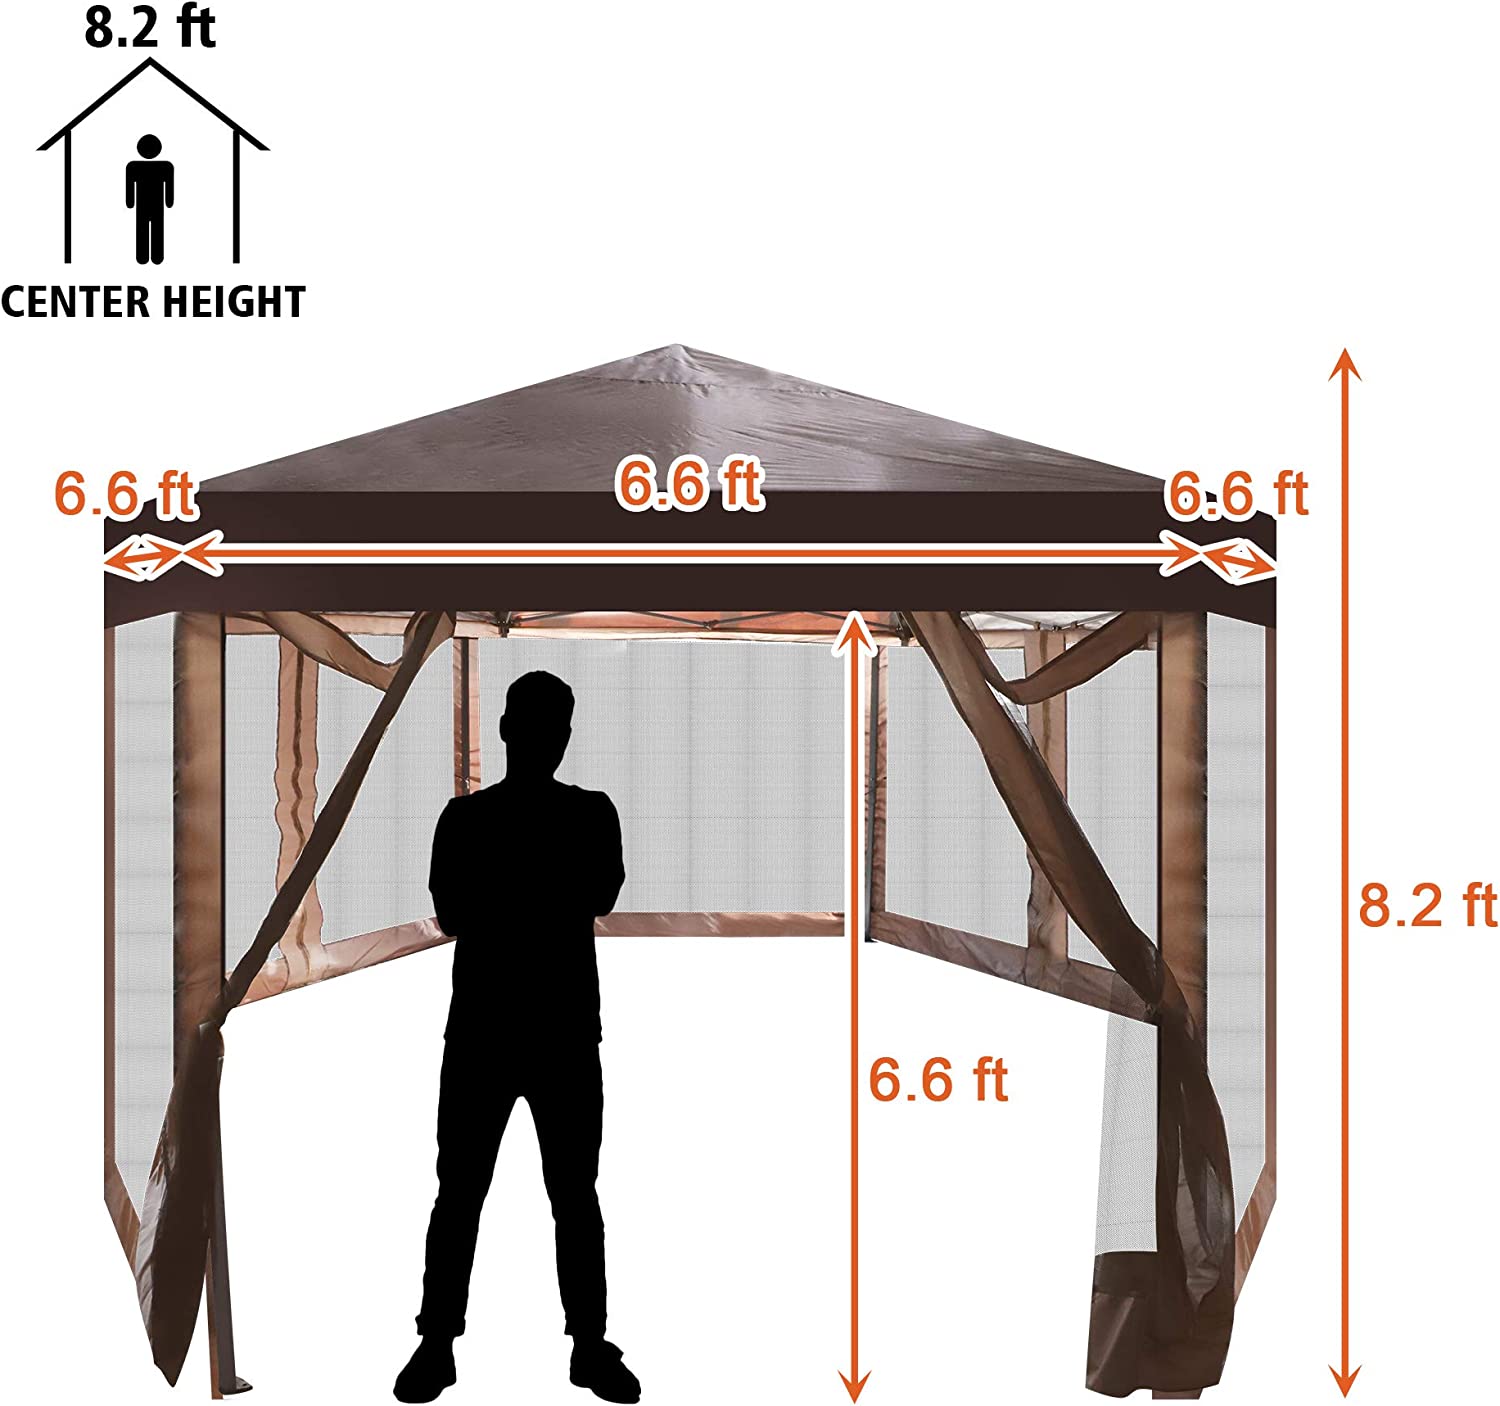 Outdoor Gazebo Patio Hexagonal Canopy Tent Sun Shade with Mosquito Netting and Carry Bag for Backyard Party